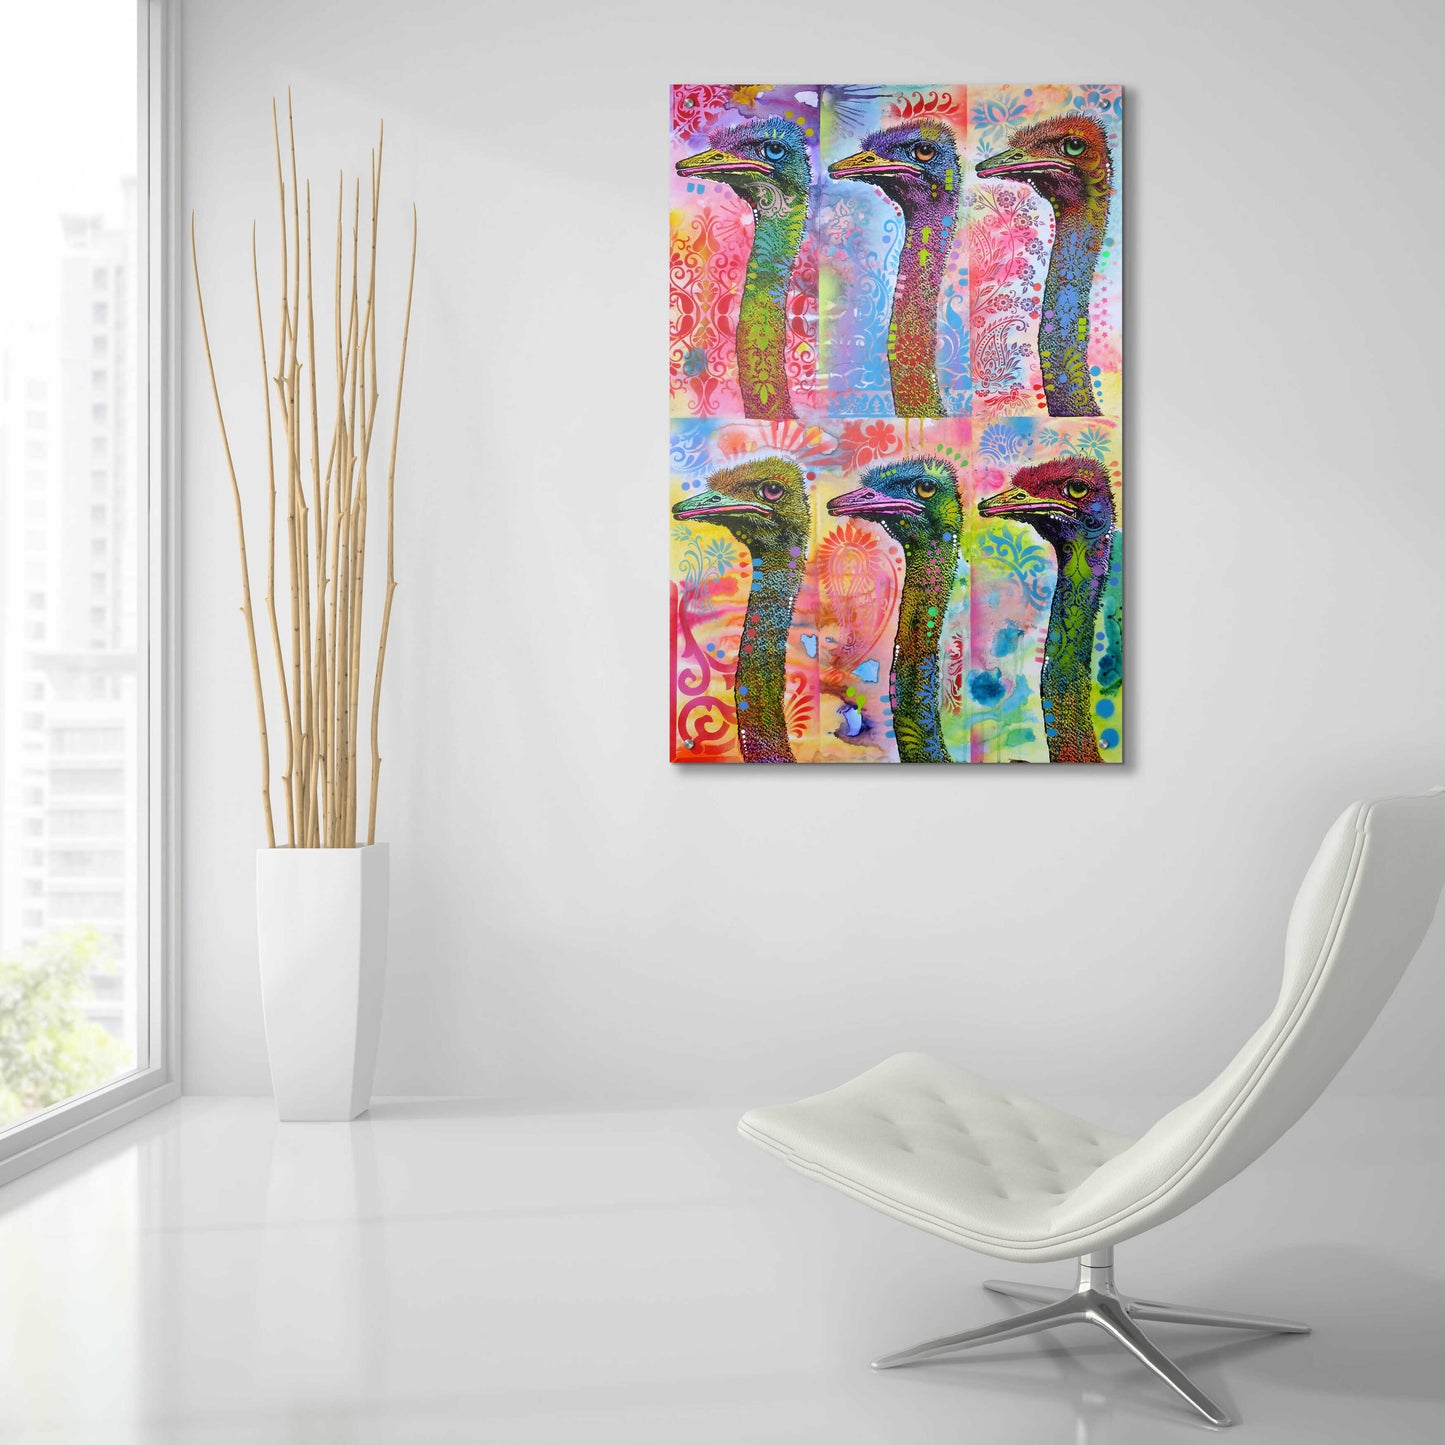 Epic Art '6 Ostriches' by Dean Russo, Acrylic Glass Wall Art,24x36